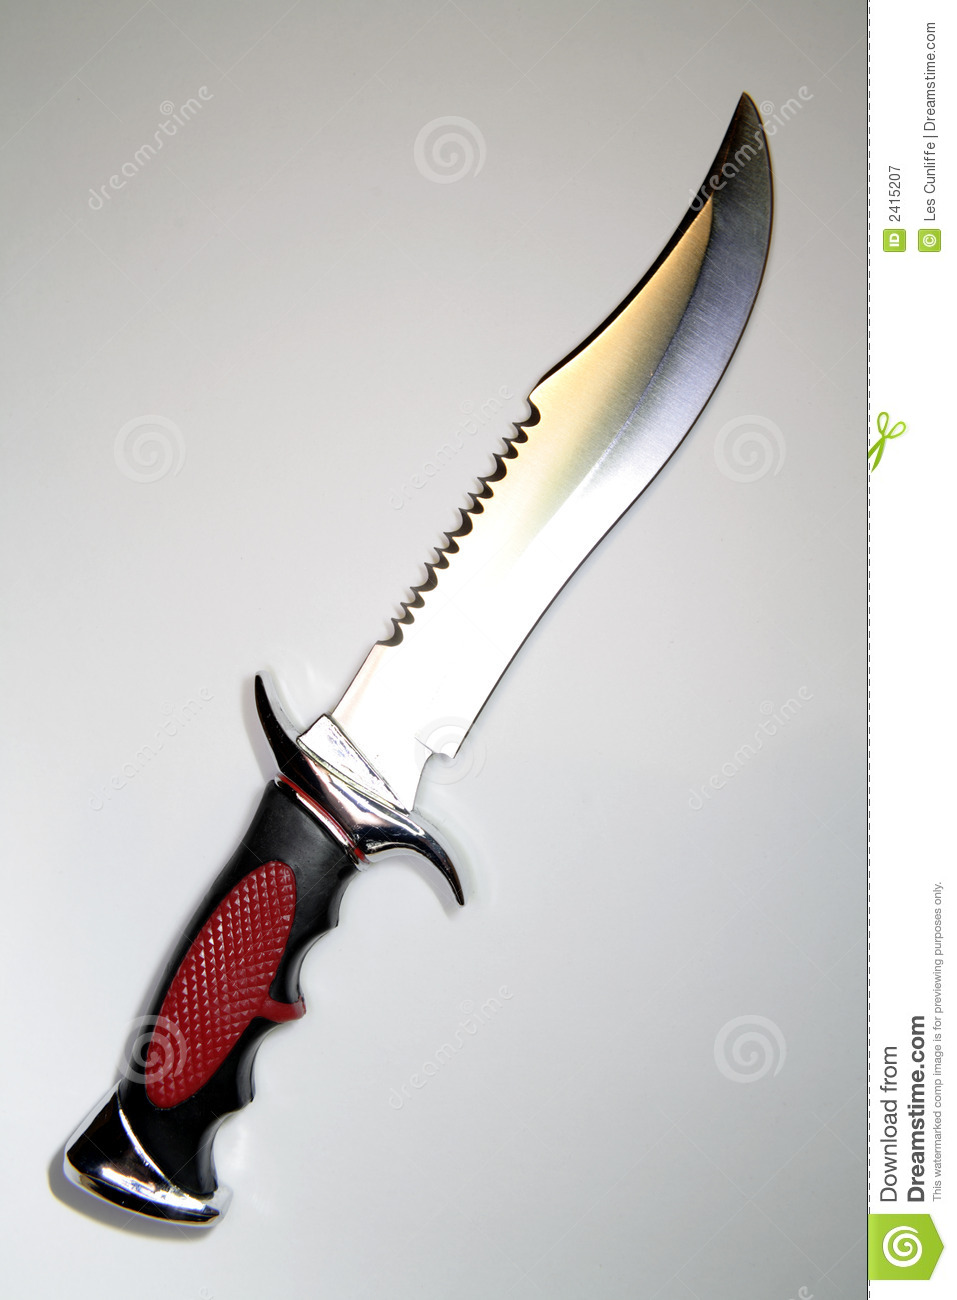 Hunting Knife Royalty Free Stock Photography   Image  2415207